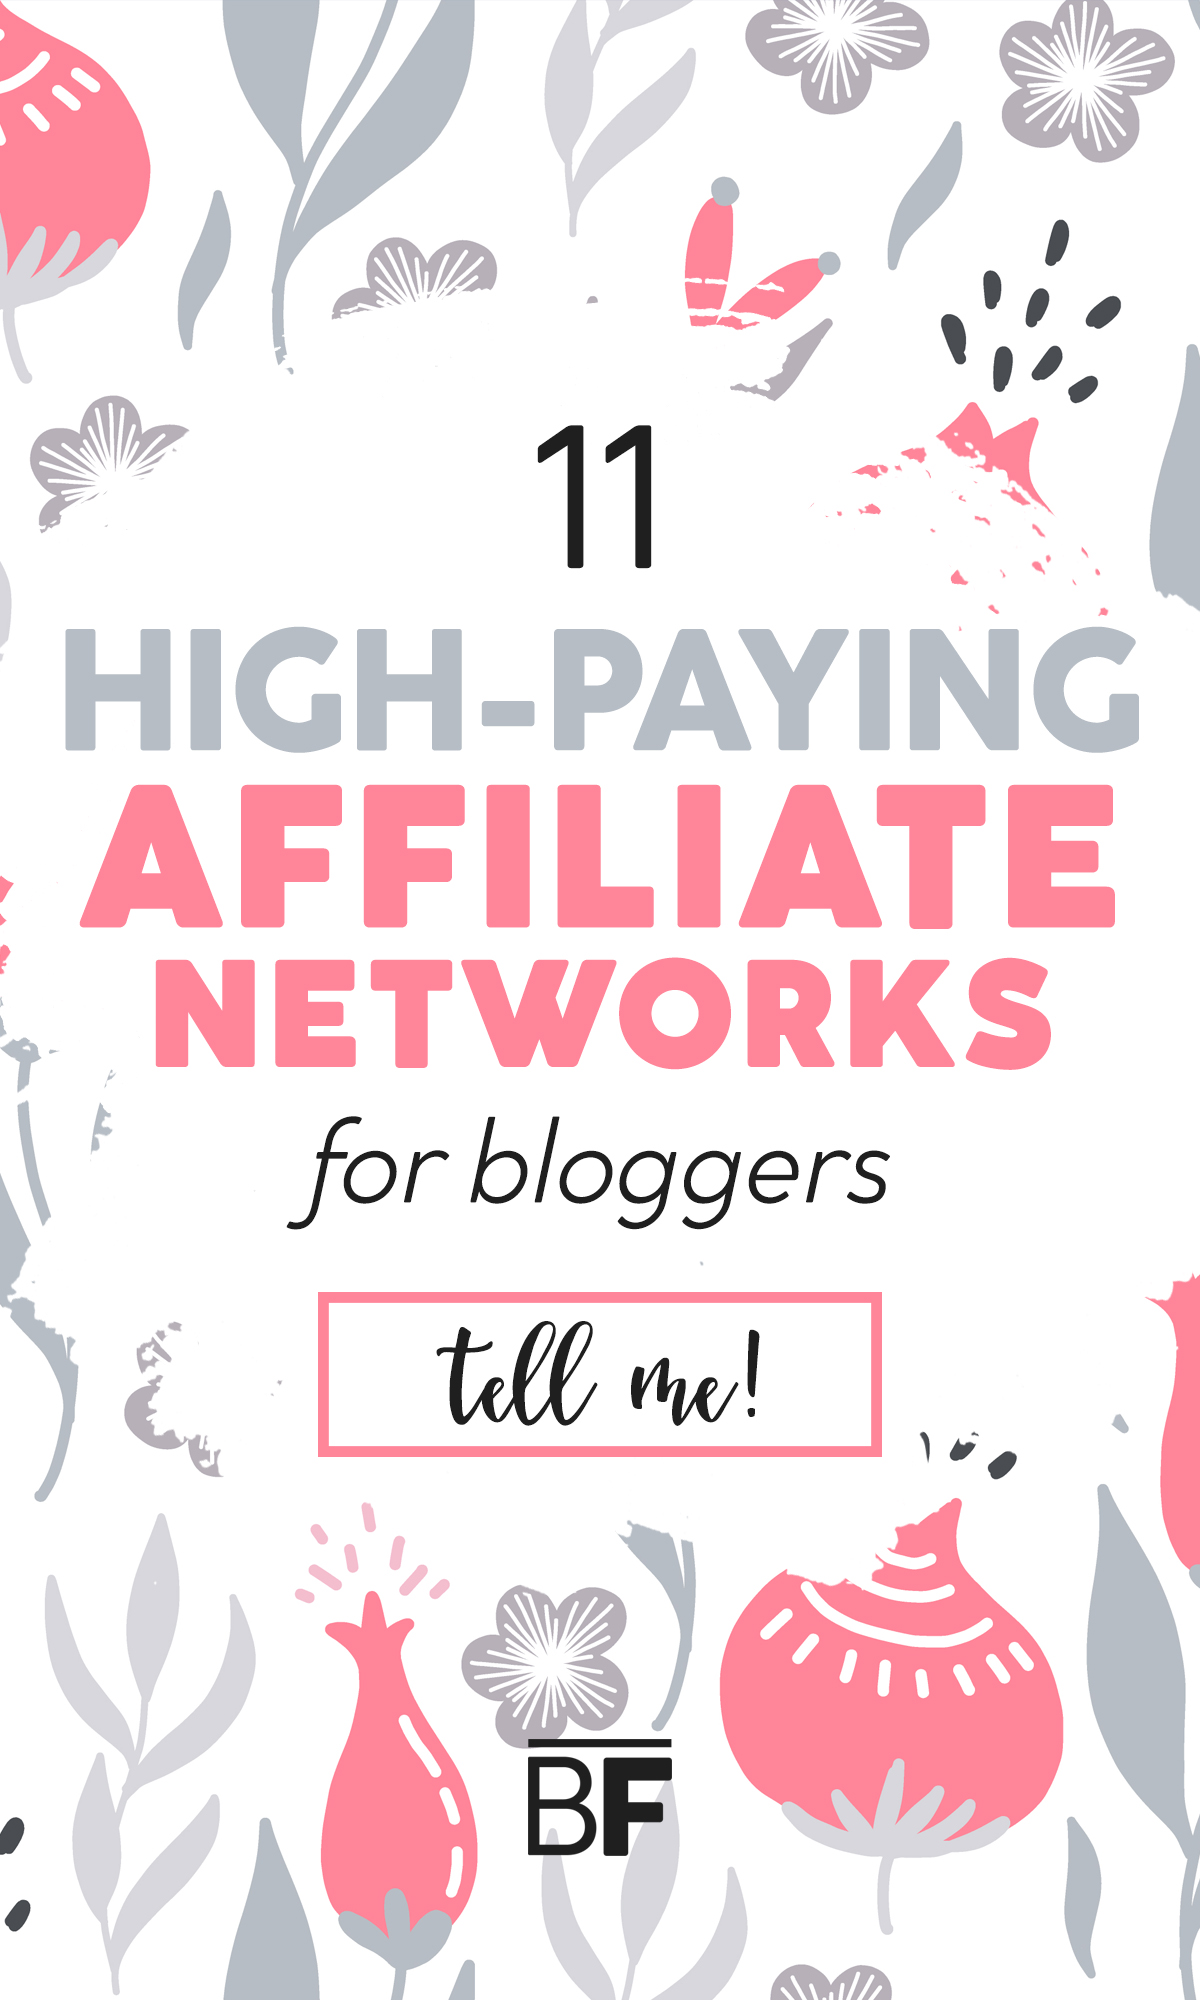 Ready to make money blogging? These high paying affiliate networks for new bloggers is a great place to start with the monetization process! #makemoneyblogging #affiliatemarketing #bloggingtips